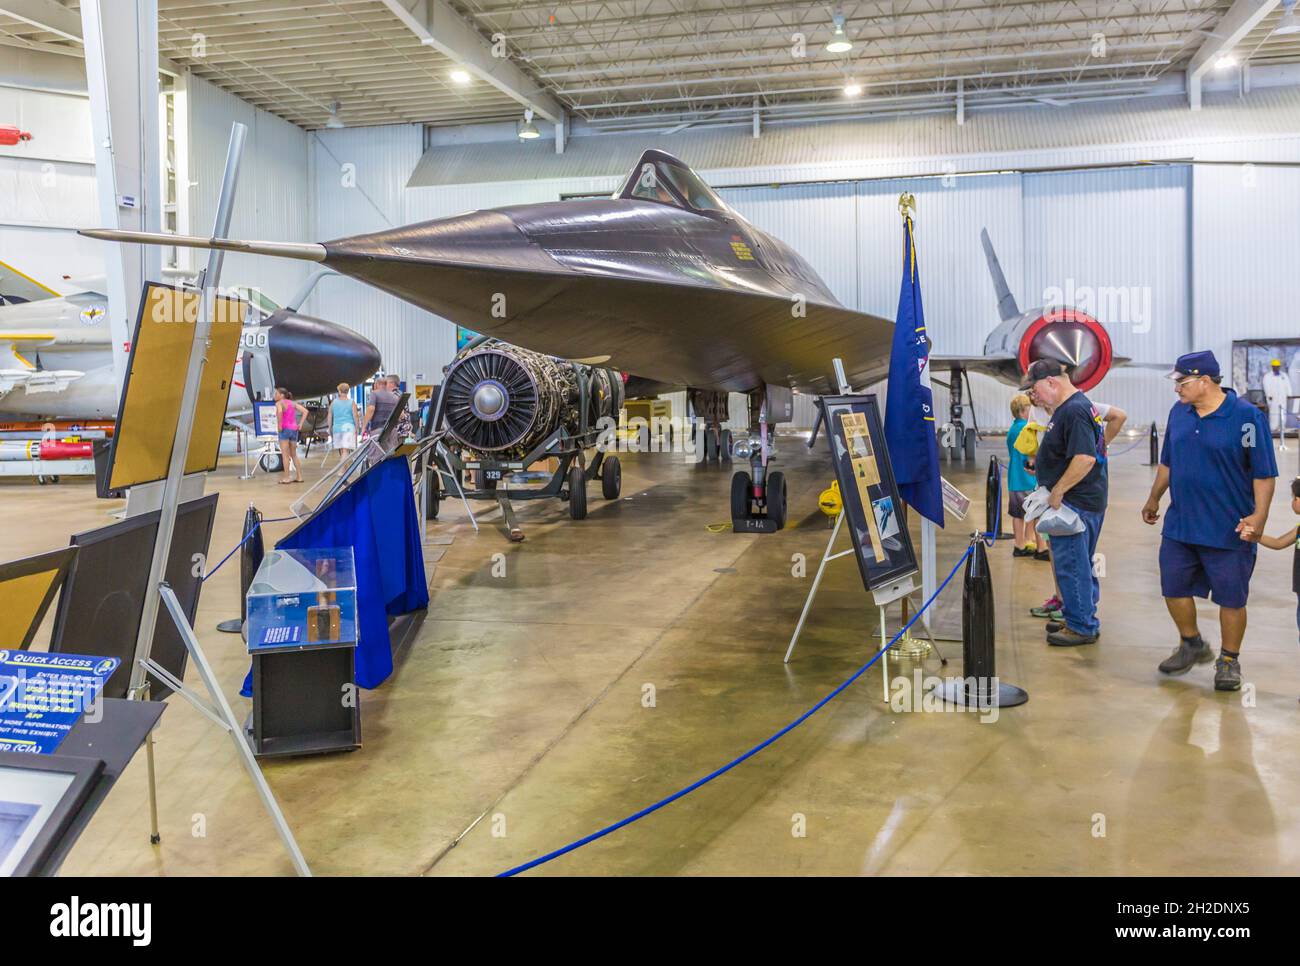 CIA A-12 Blackbird stealth spy plane on display at the Battleship Memorial Park in Mobile, Alabama Stock Photo